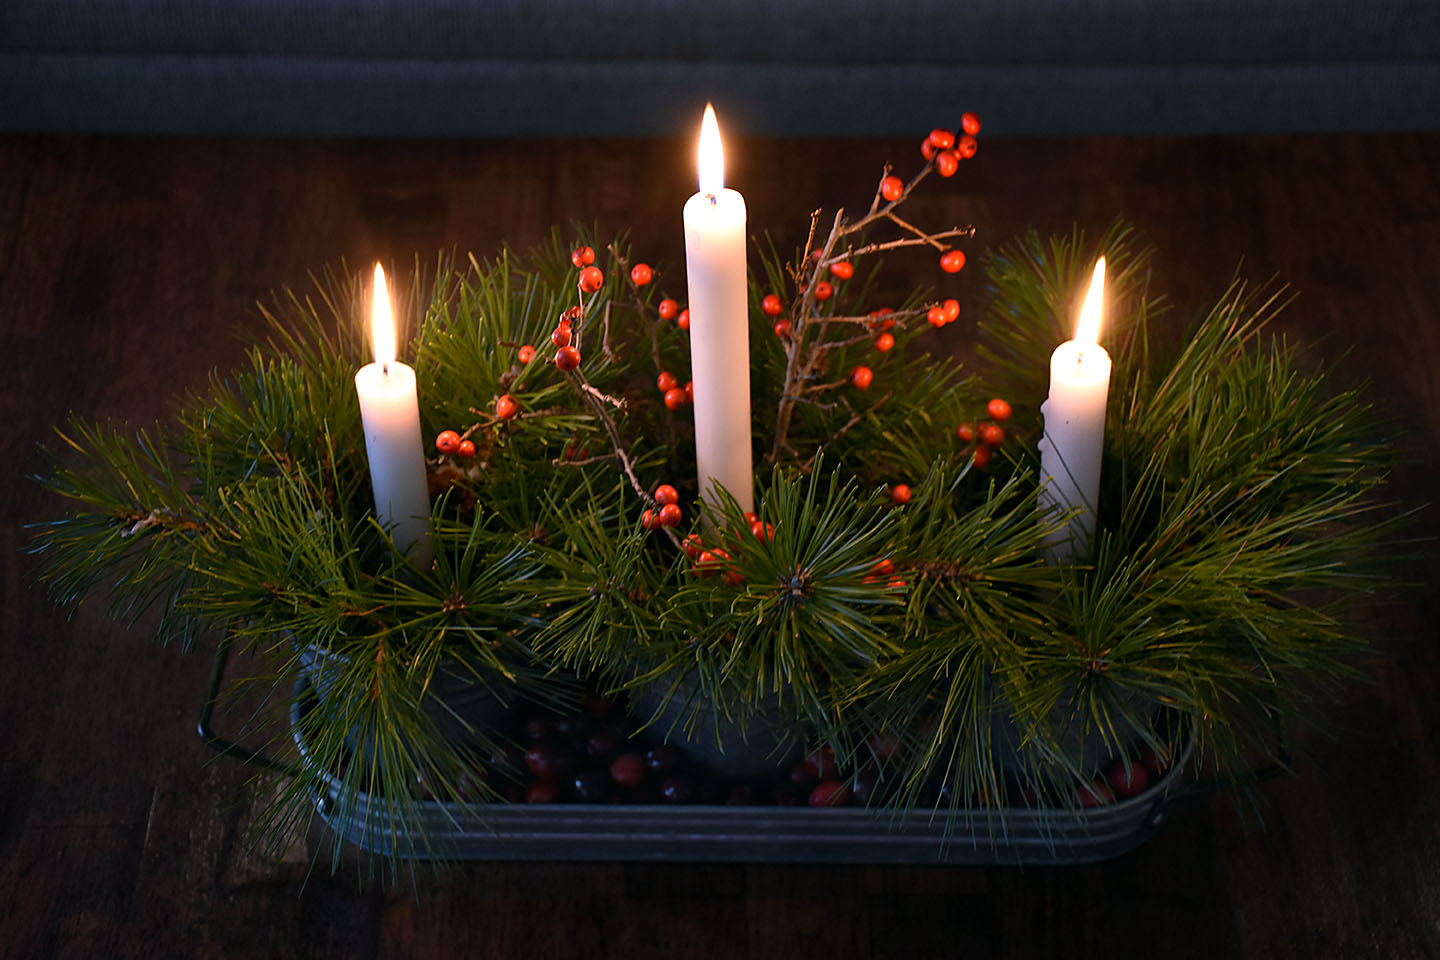 pine branches and cranberries dress up these candles